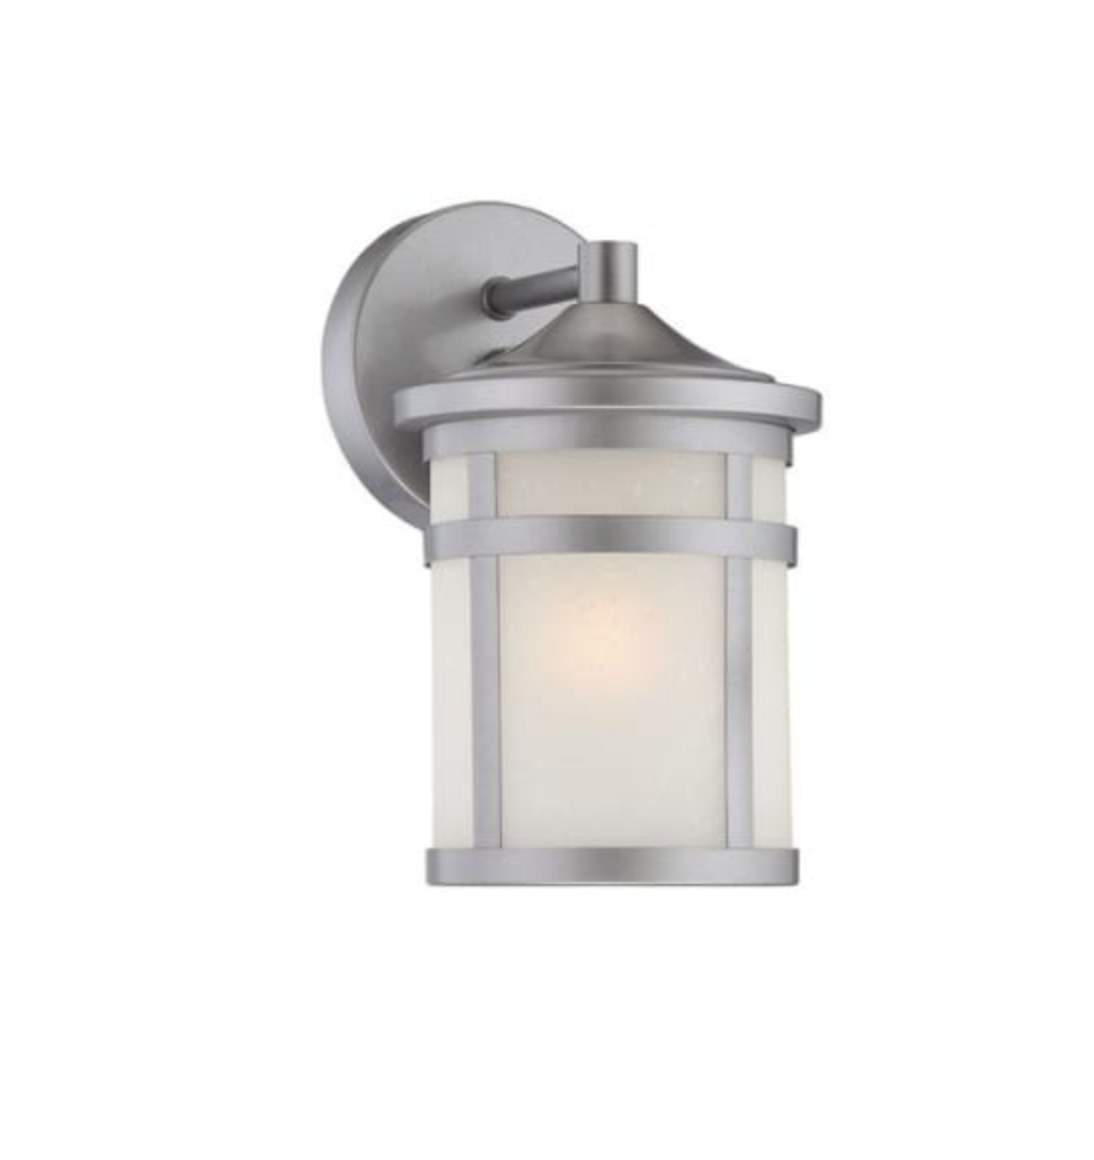 Leon Outdoor Wall Sconce